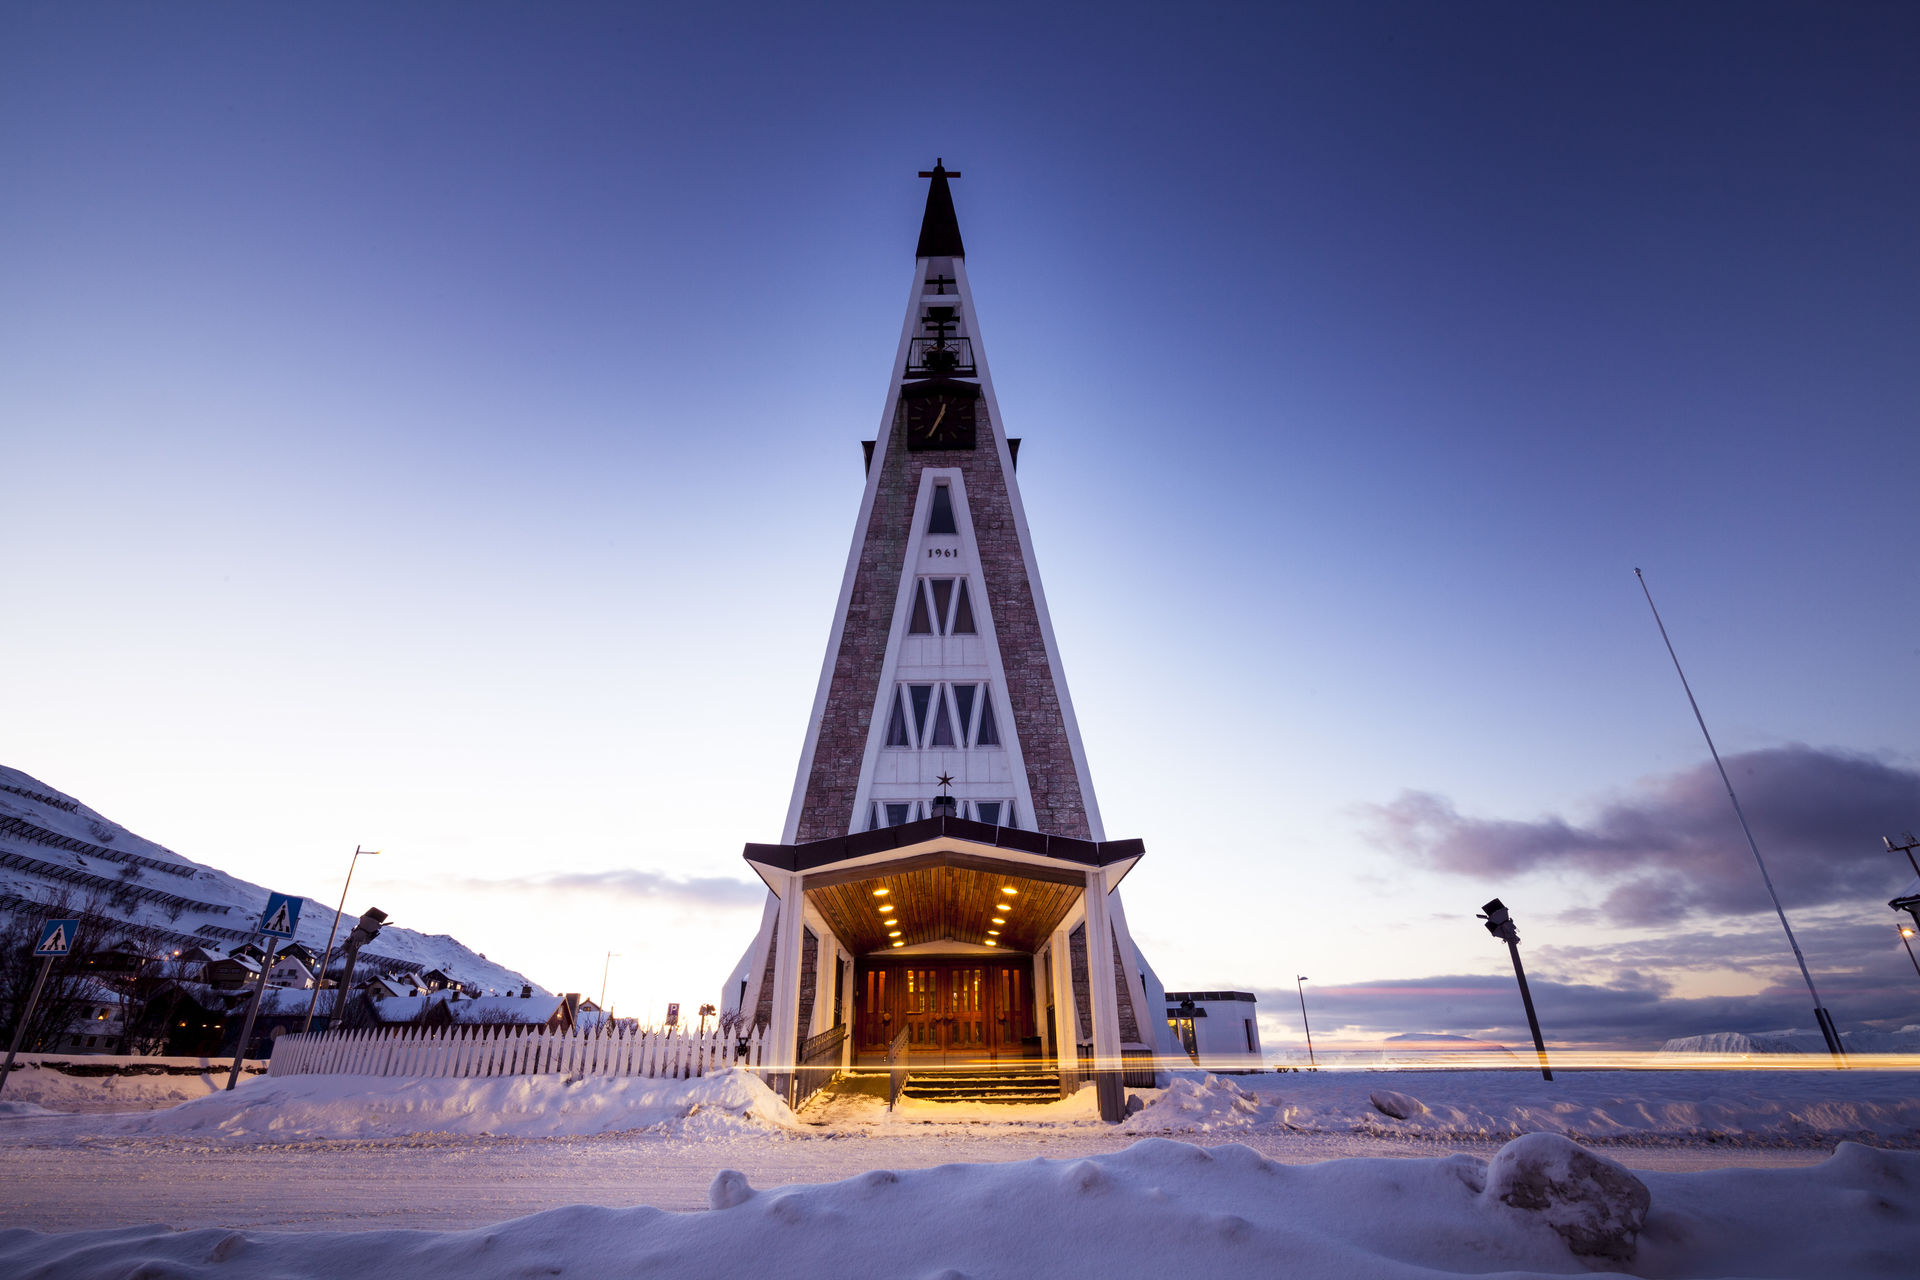 The 1961 church is one of the most beautiful from the age of reconstruction © Ziggi Wantuch